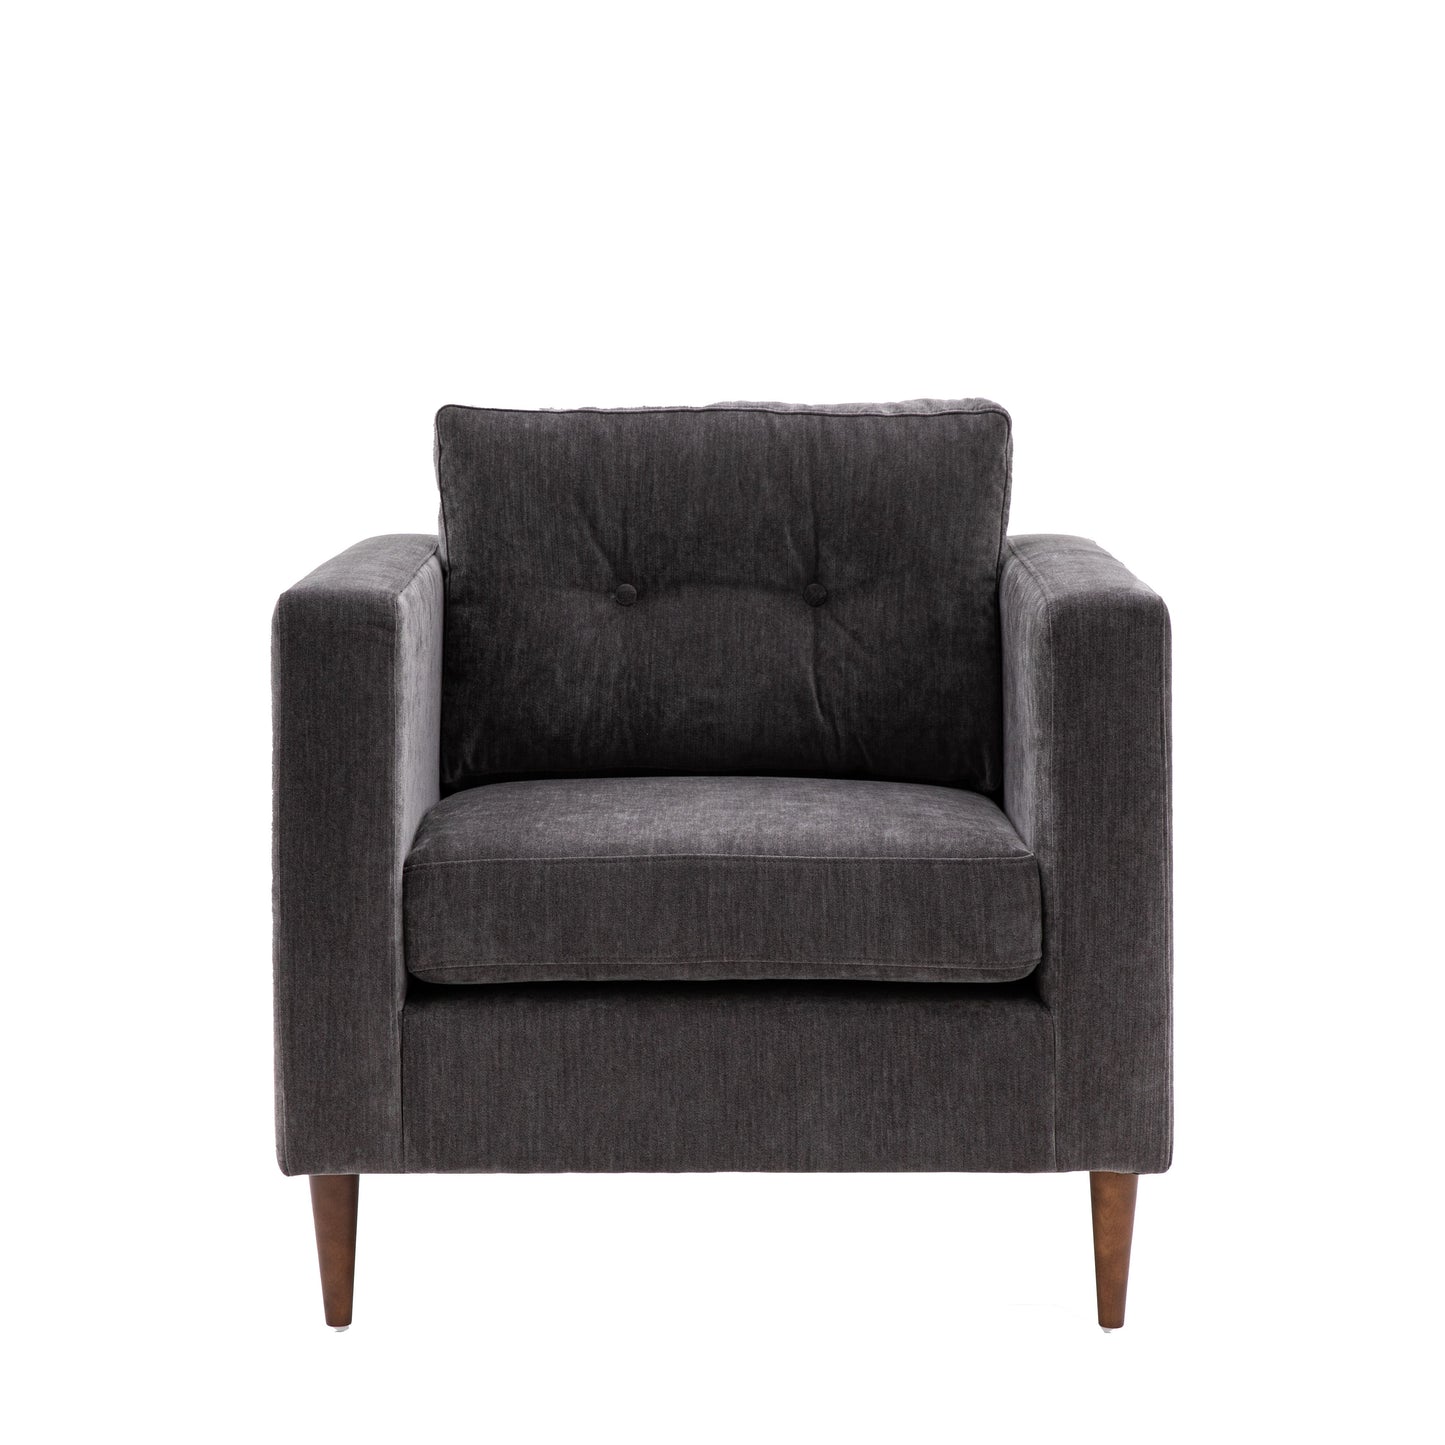 Harlow Armchair in Charcoal